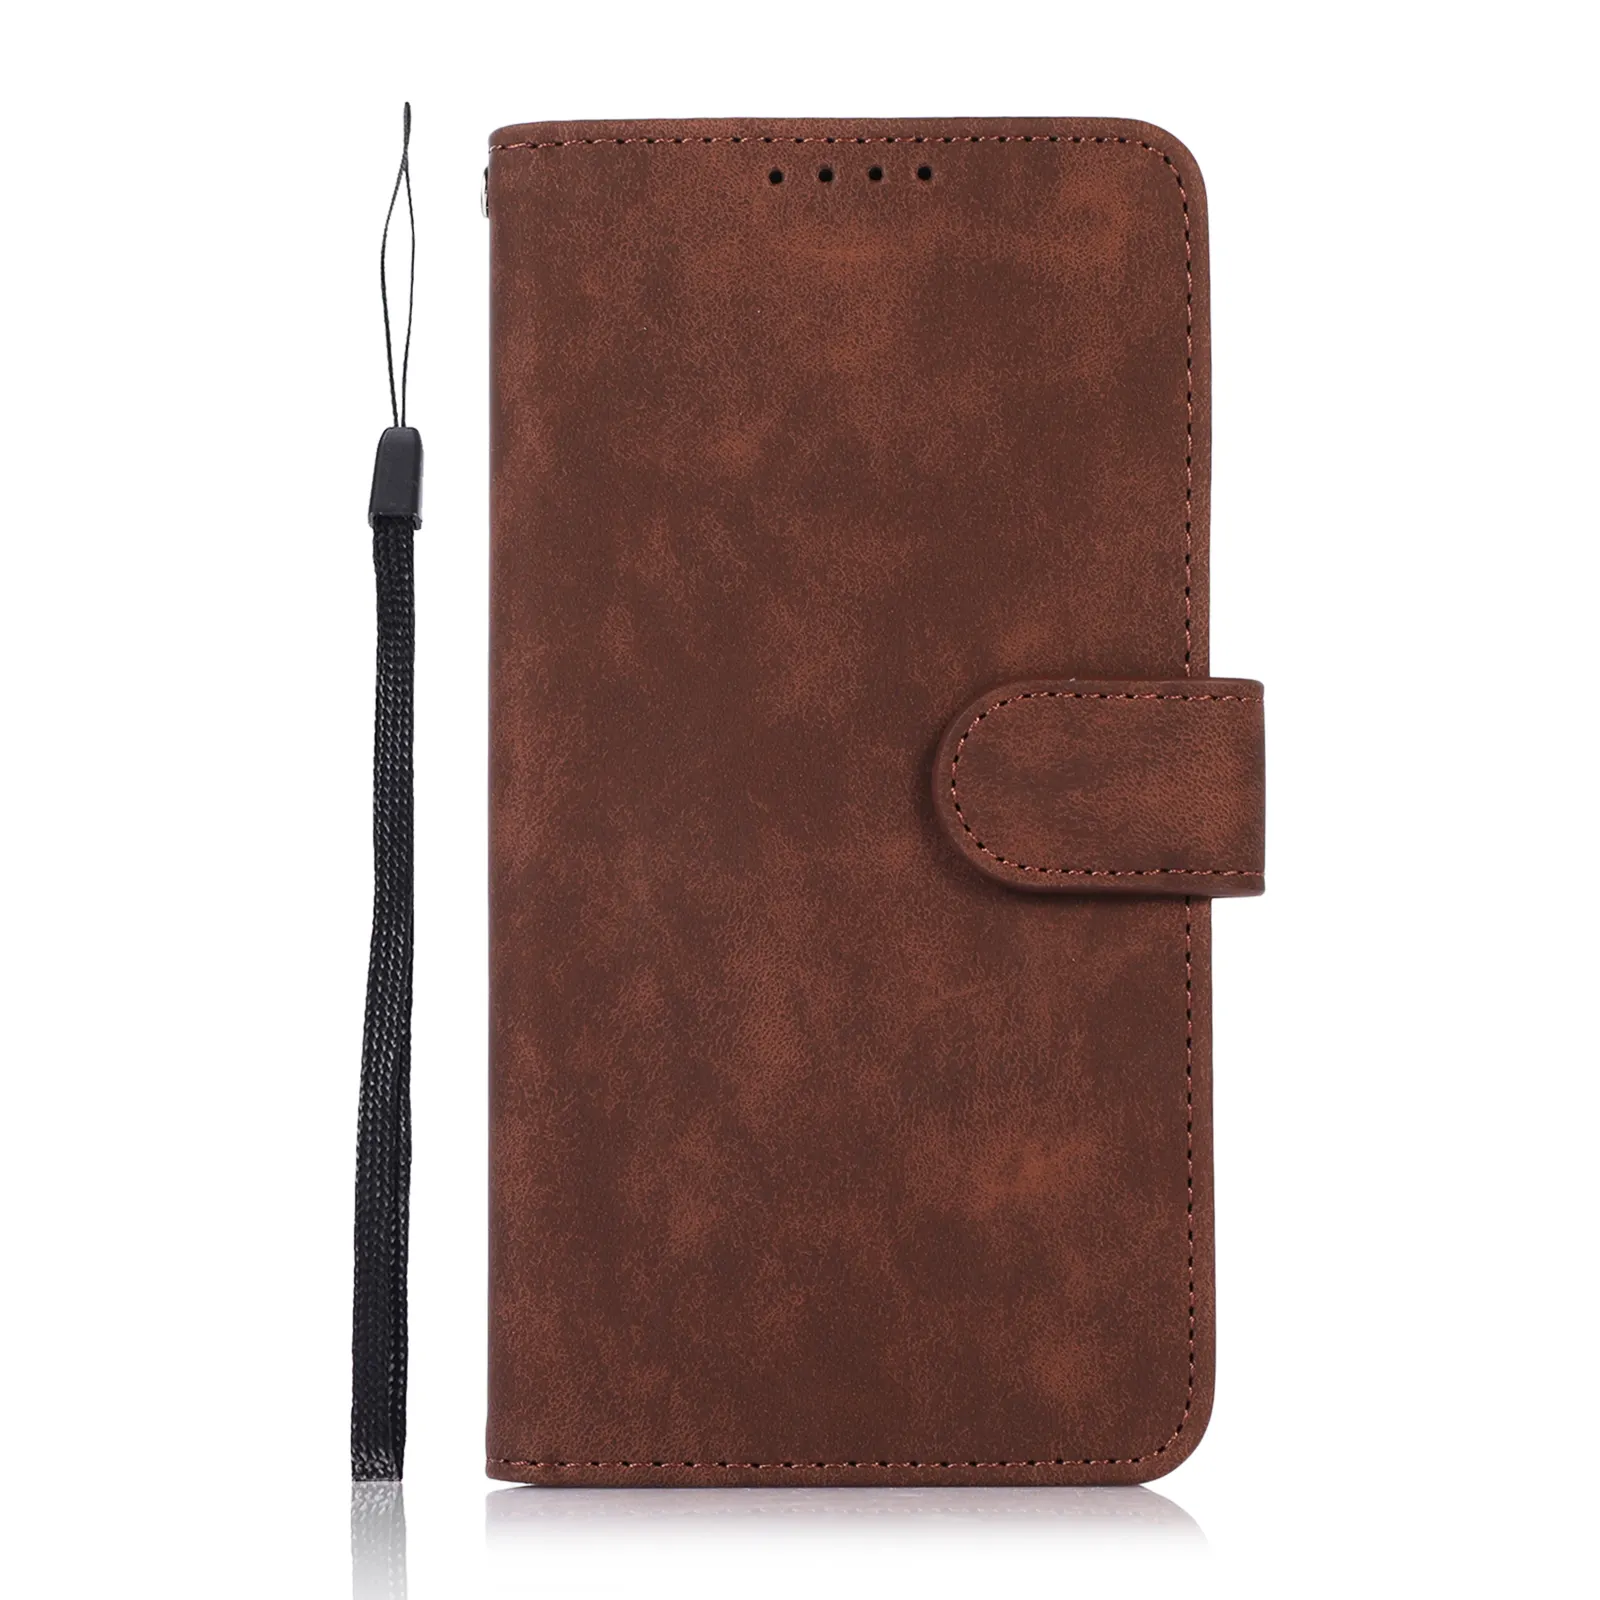 Newest Luxury Personalized Leather Wallet Mobile Phone Case For Iphone Samsung Nokia Google